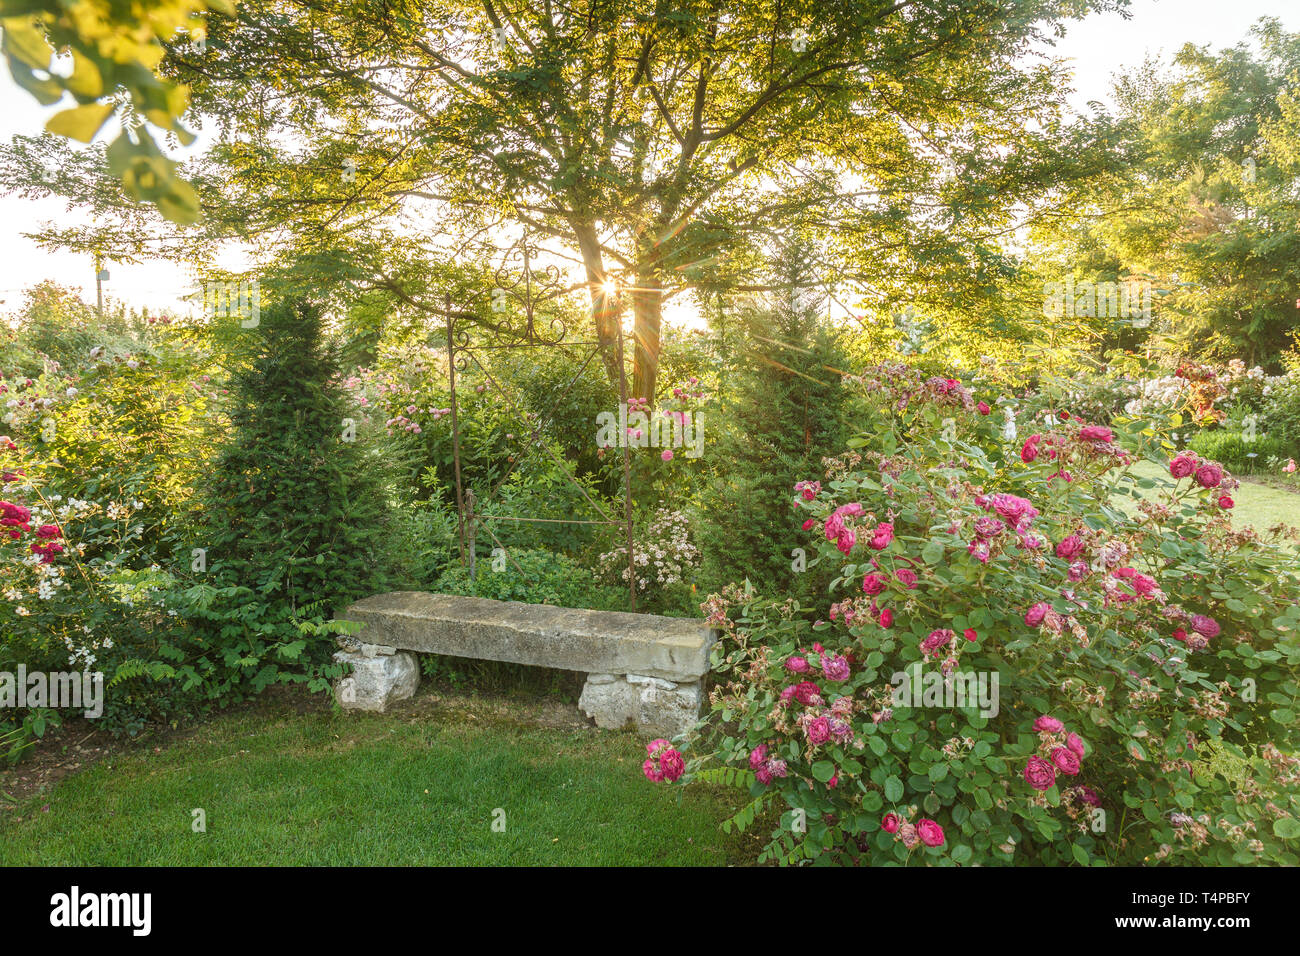 Roquelin’s gardens, Les jardins de Roquelin, France : stone bench surrounded by two yews under a black locust (Robinia pseudoacacia) and Rosa 'Gipsy B Stock Photo